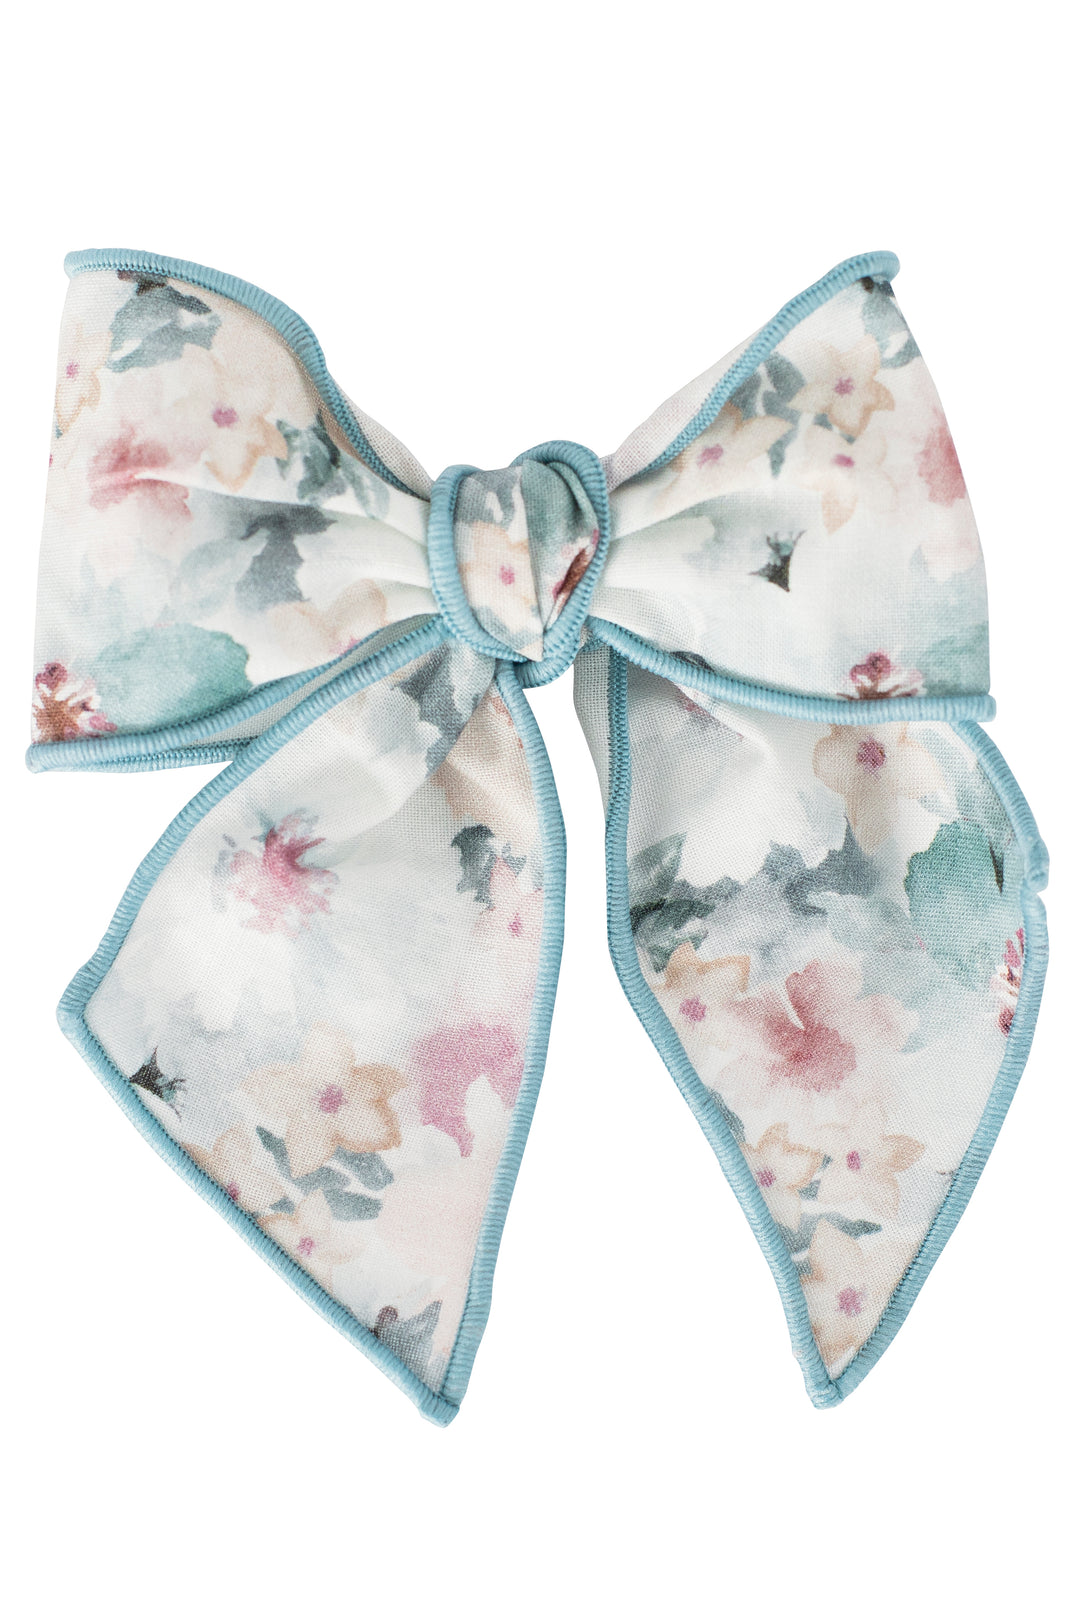 Calamaro Excellentt PREORDER Dusky Blue Floral Hair Bow | Millie and John